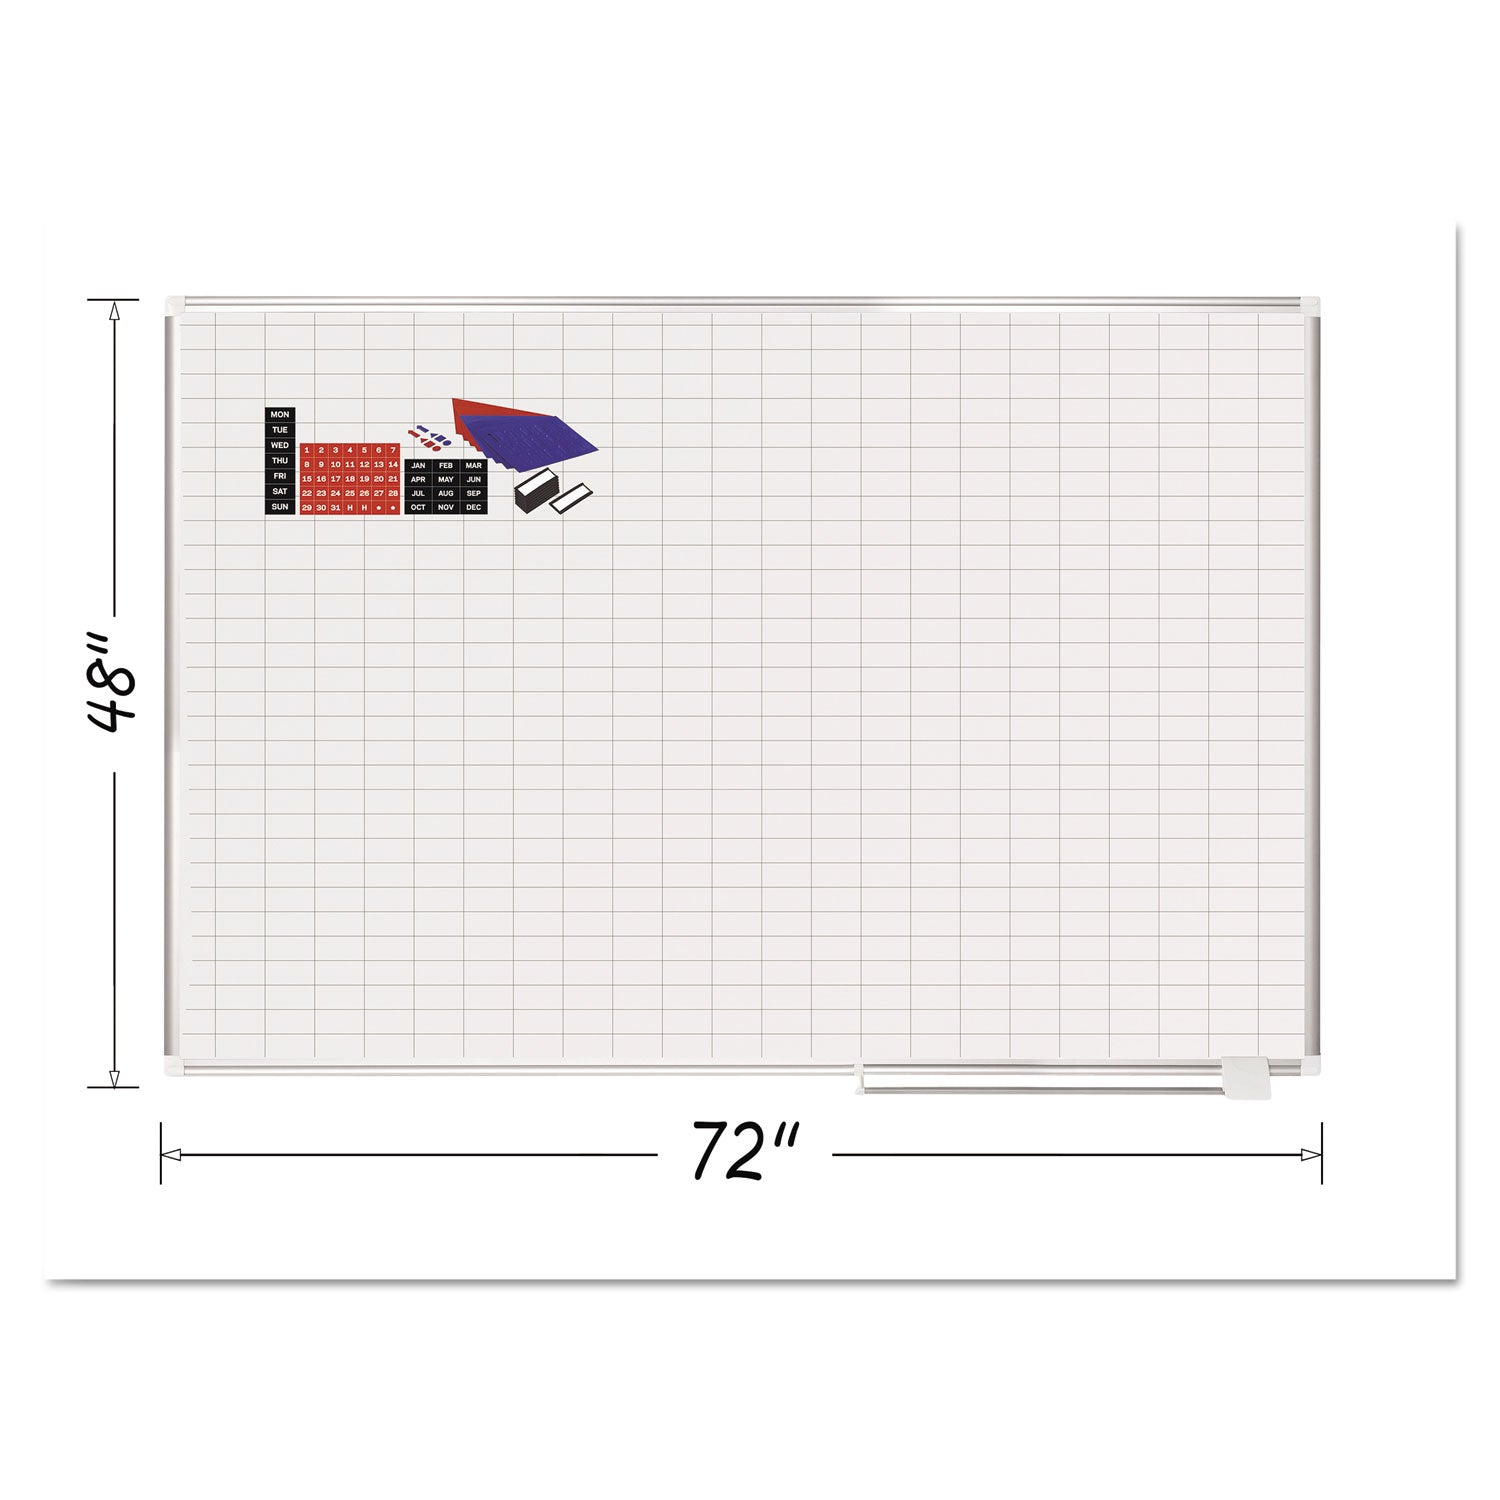 Gridded Magnetic Steel Dry Erase Planning Board with Accessories, 1 x 2 Grid, 72 x 48, White Surface, Silver Aluminum Frame - 